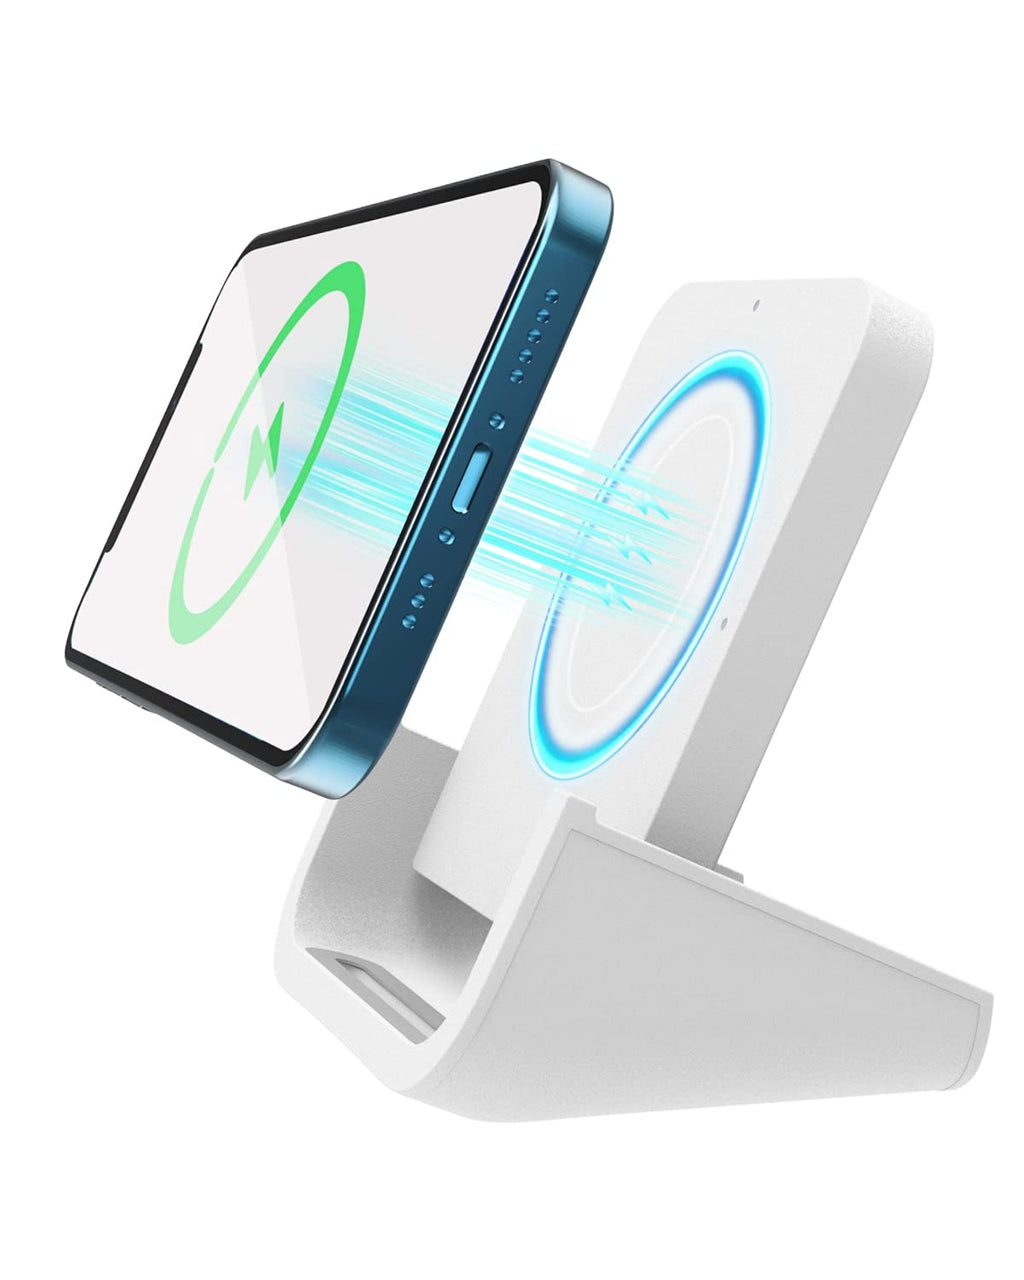  [AUSTRALIA] - BUBEYYIE 10W Fast Wireless Charger Charging Stand Qi-Certified Compatible with iPhone 12 11 Pro XR XS X 8 Plus Samsung Galaxy S20 S10 Note 20 10 Google LG and Other Qi-Enable Phones (White) White